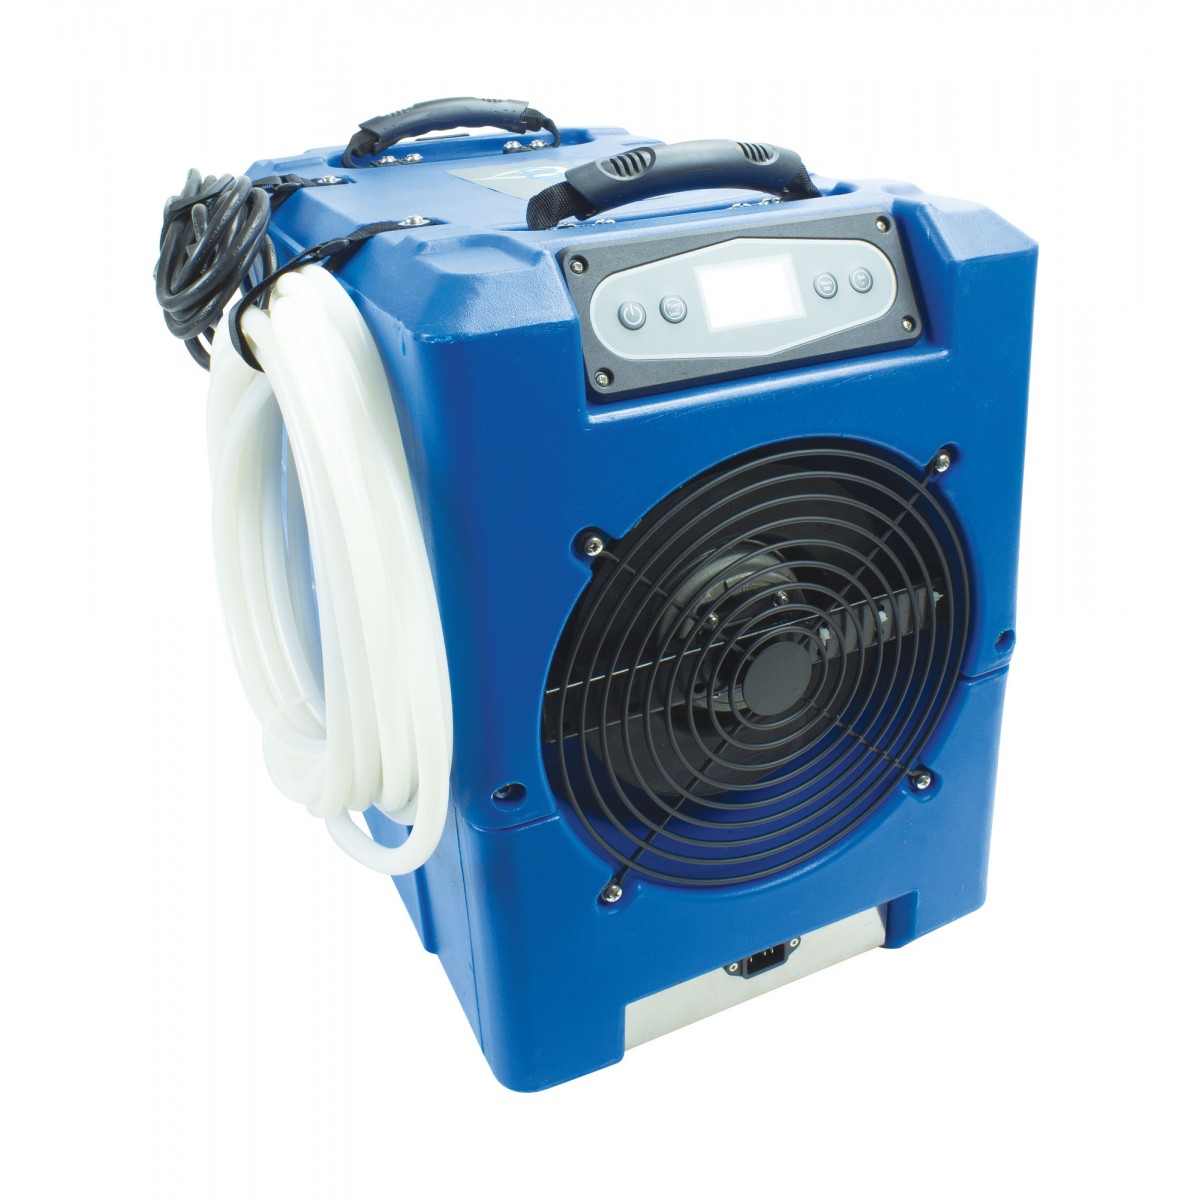 Dehumidifier Commercial With A Capacity Of 80Pt/Day (45.4609 Liters By Day)